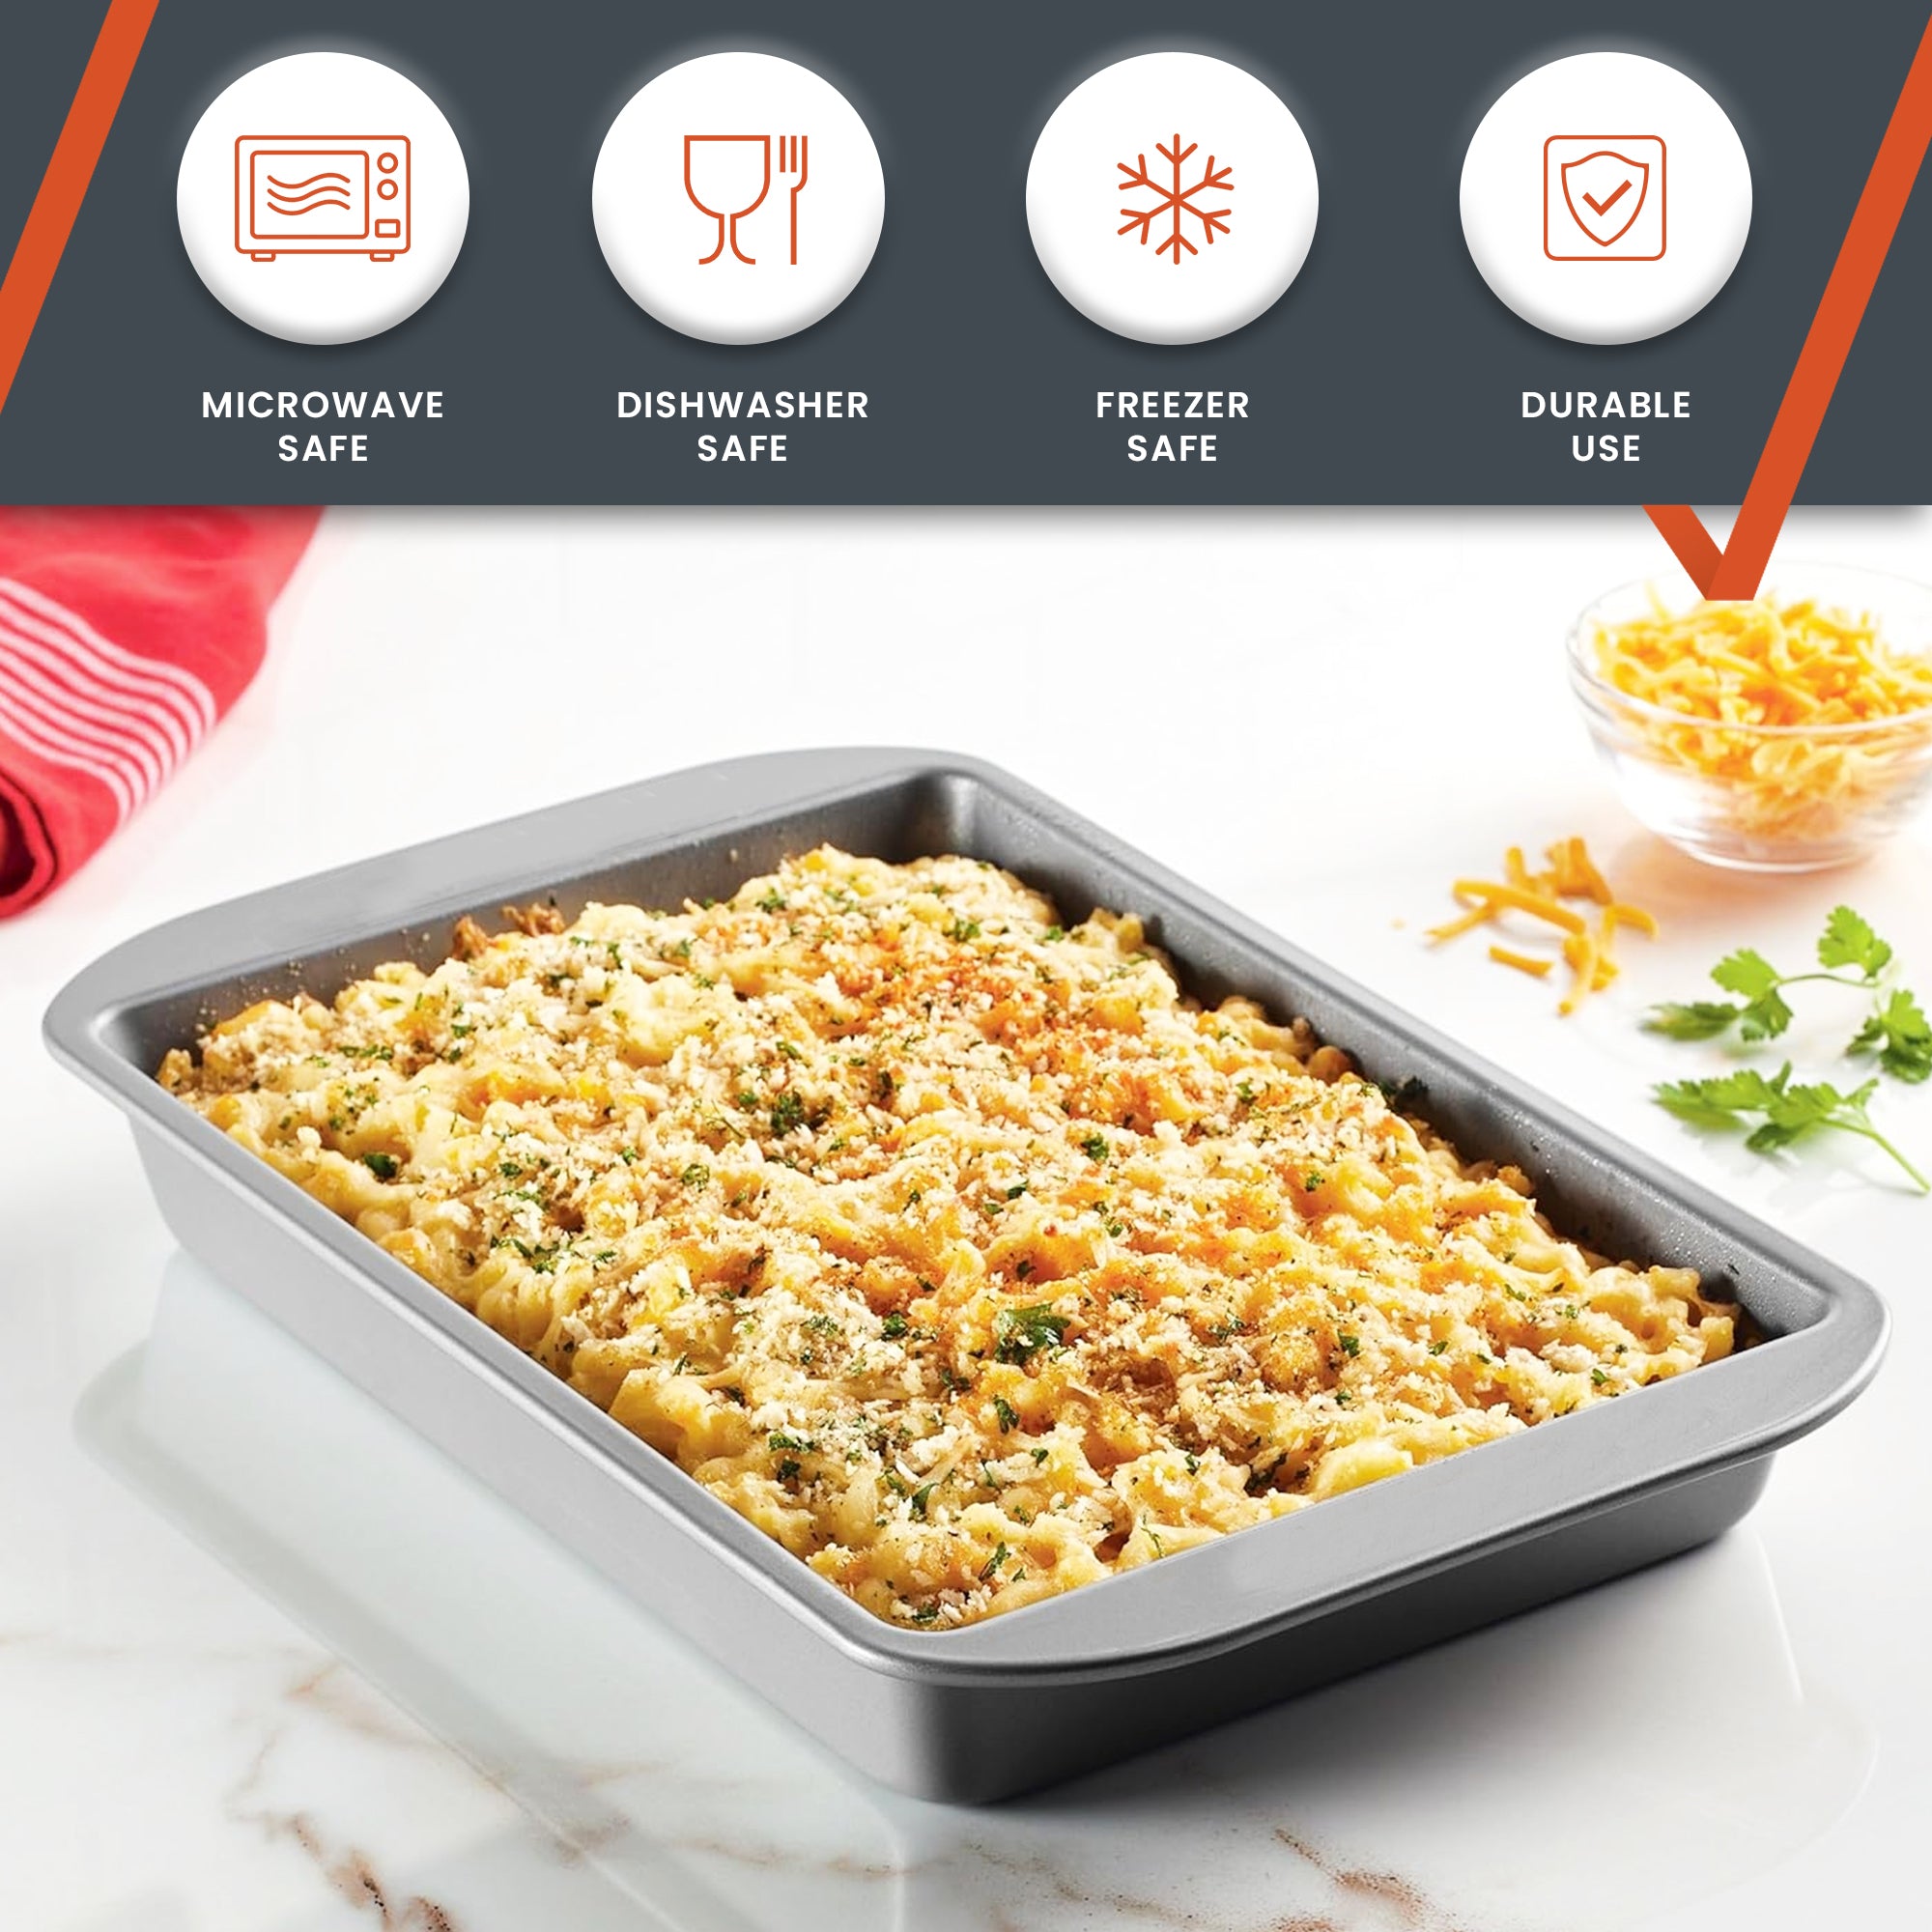 Nonstick Bakeware Baking Pan With Lid / Nonstick Cake Pan With Lid, Rectangle - 9 Inch x 13 Inch, Gray